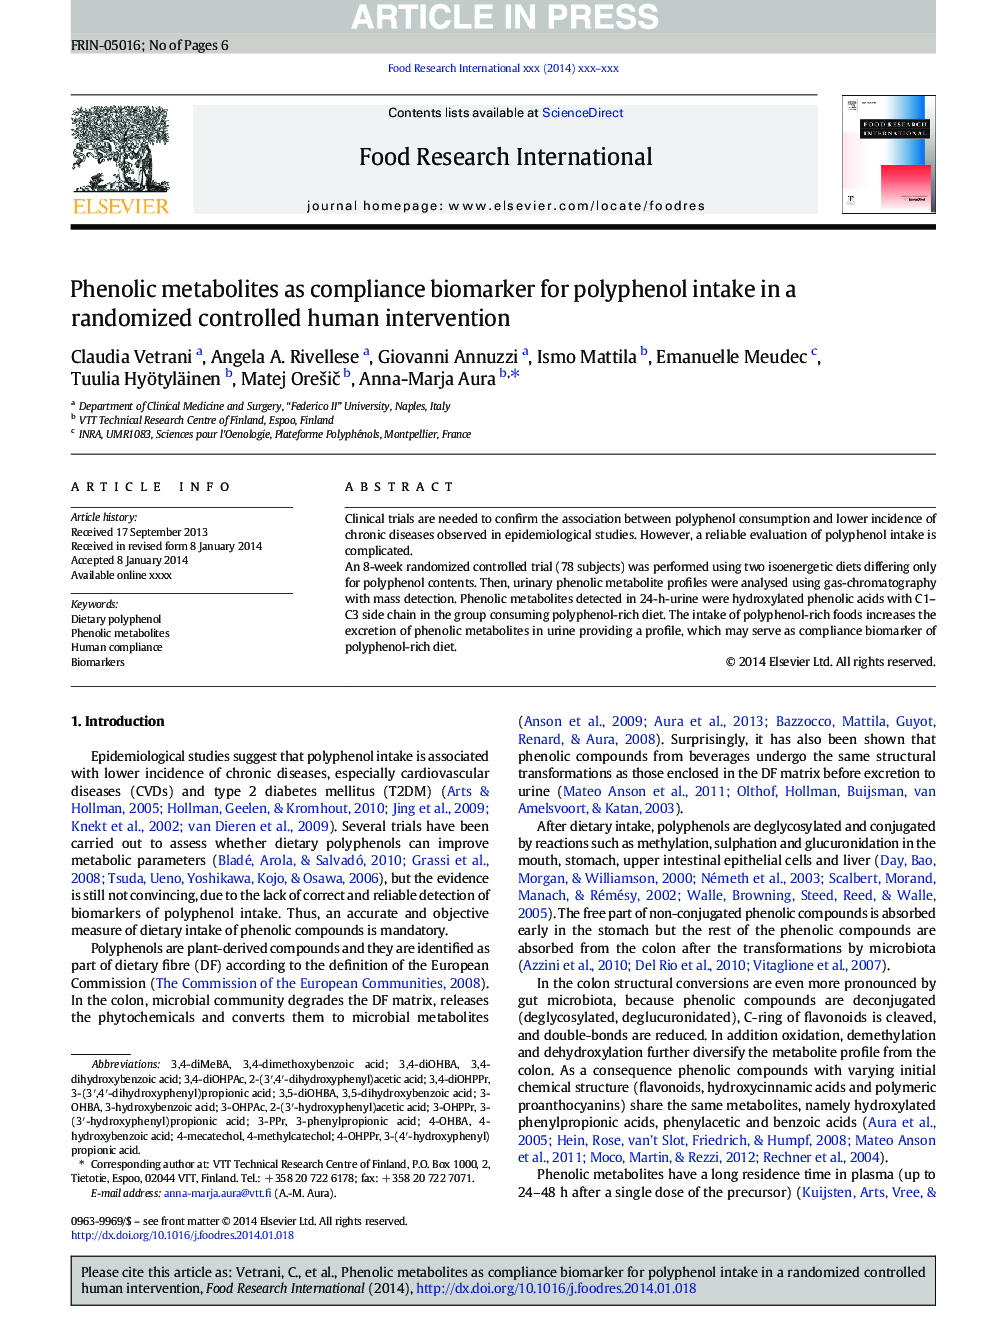 Phenolic metabolites as compliance biomarker for polyphenol intake in a randomized controlled human intervention